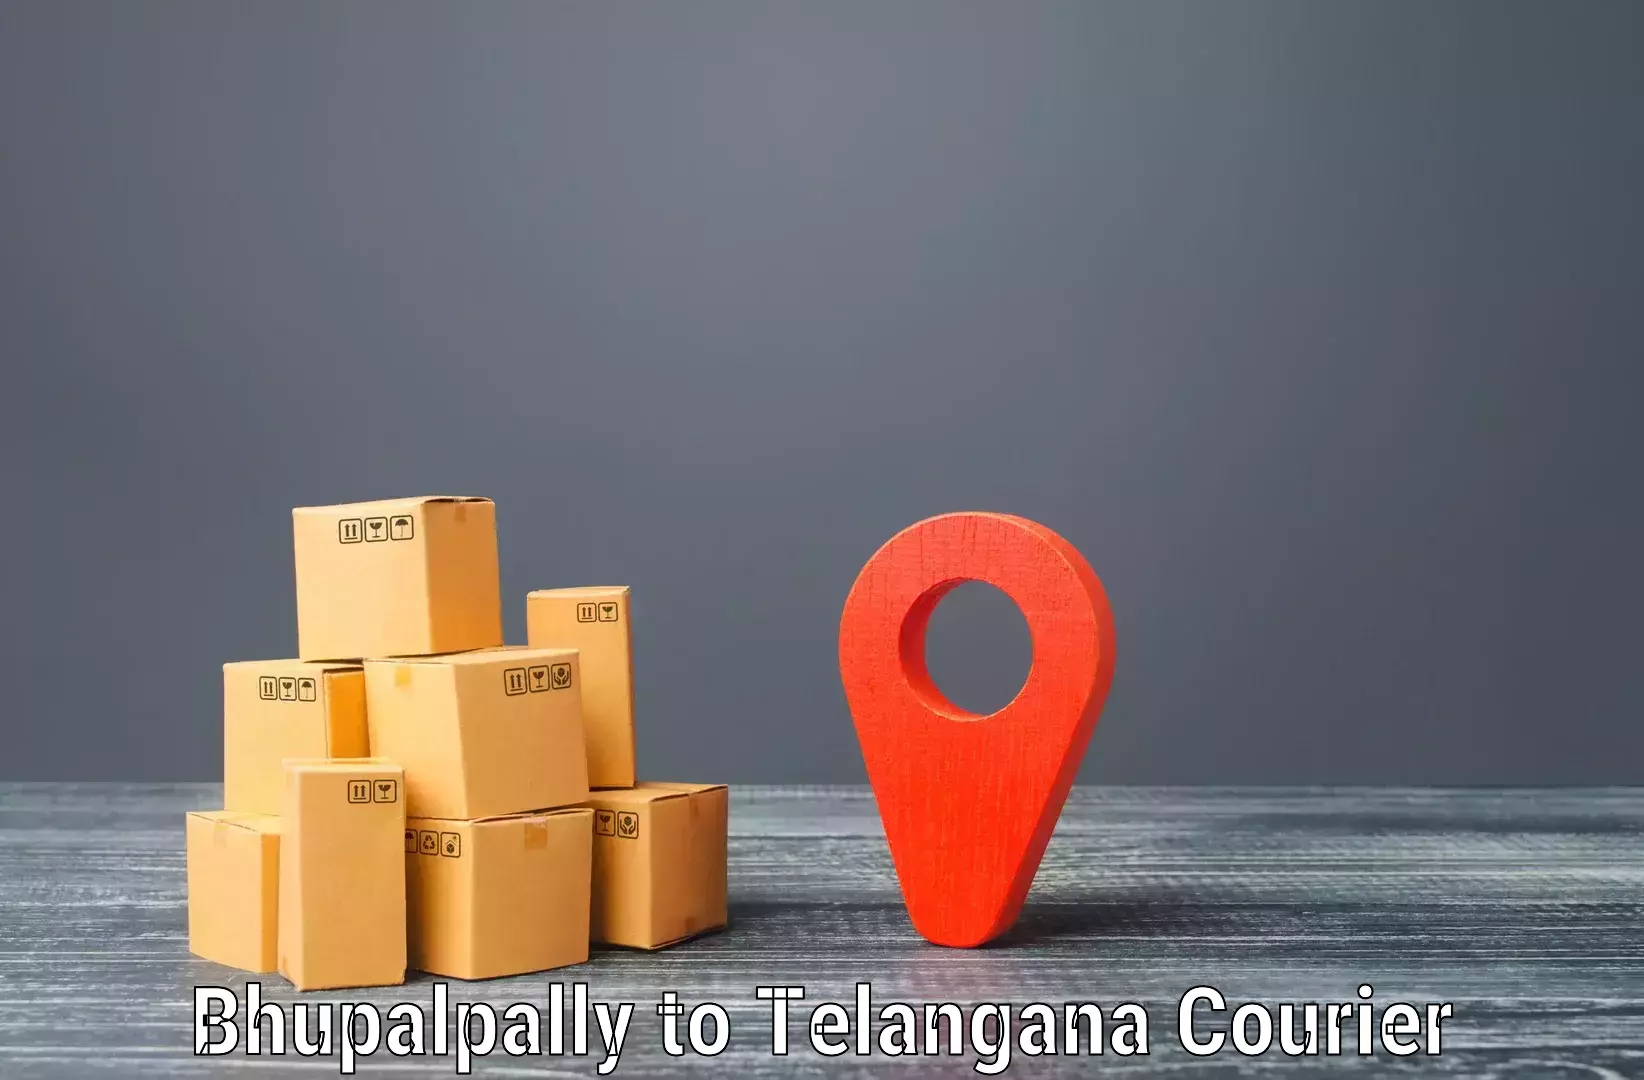 Express courier capabilities Bhupalpally to Odela